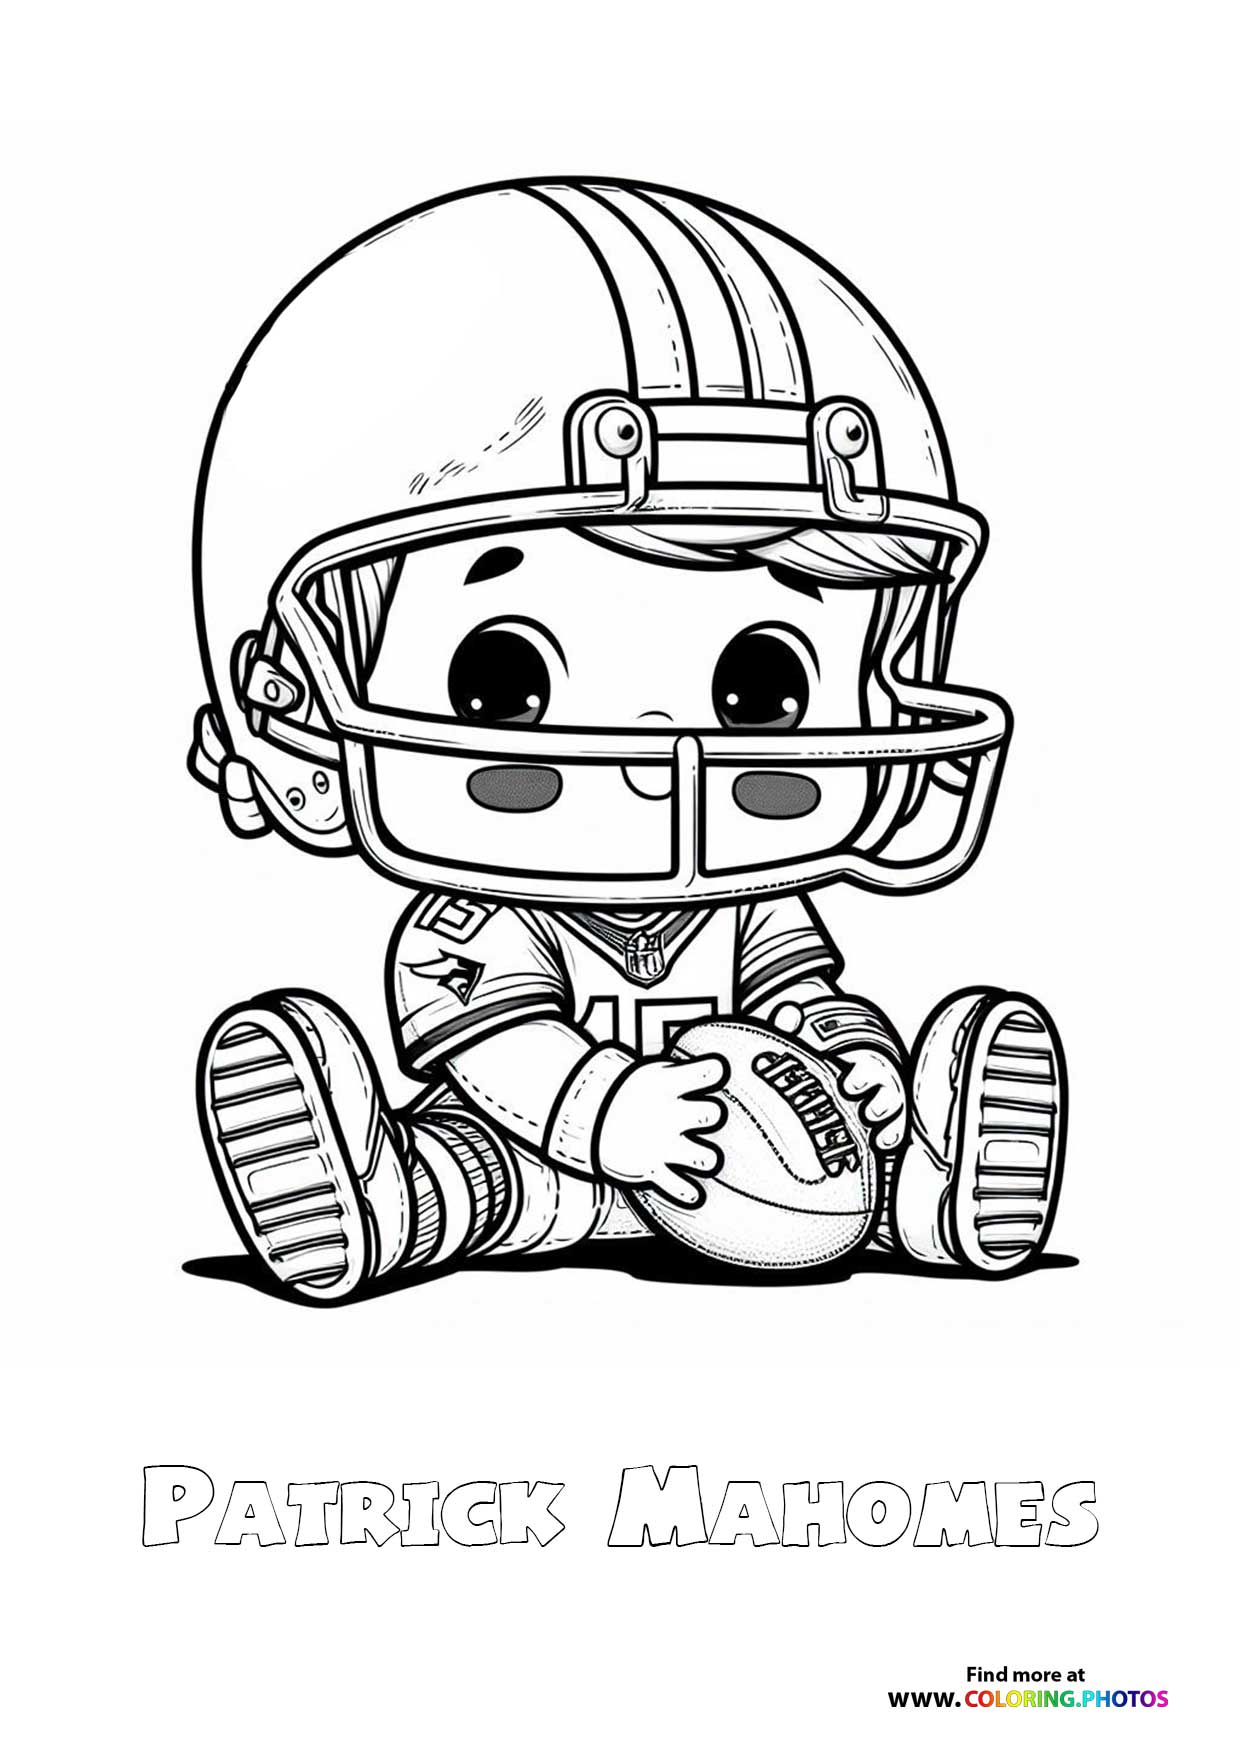 Cute little Patrick Mahomes - Coloring Pages for kids